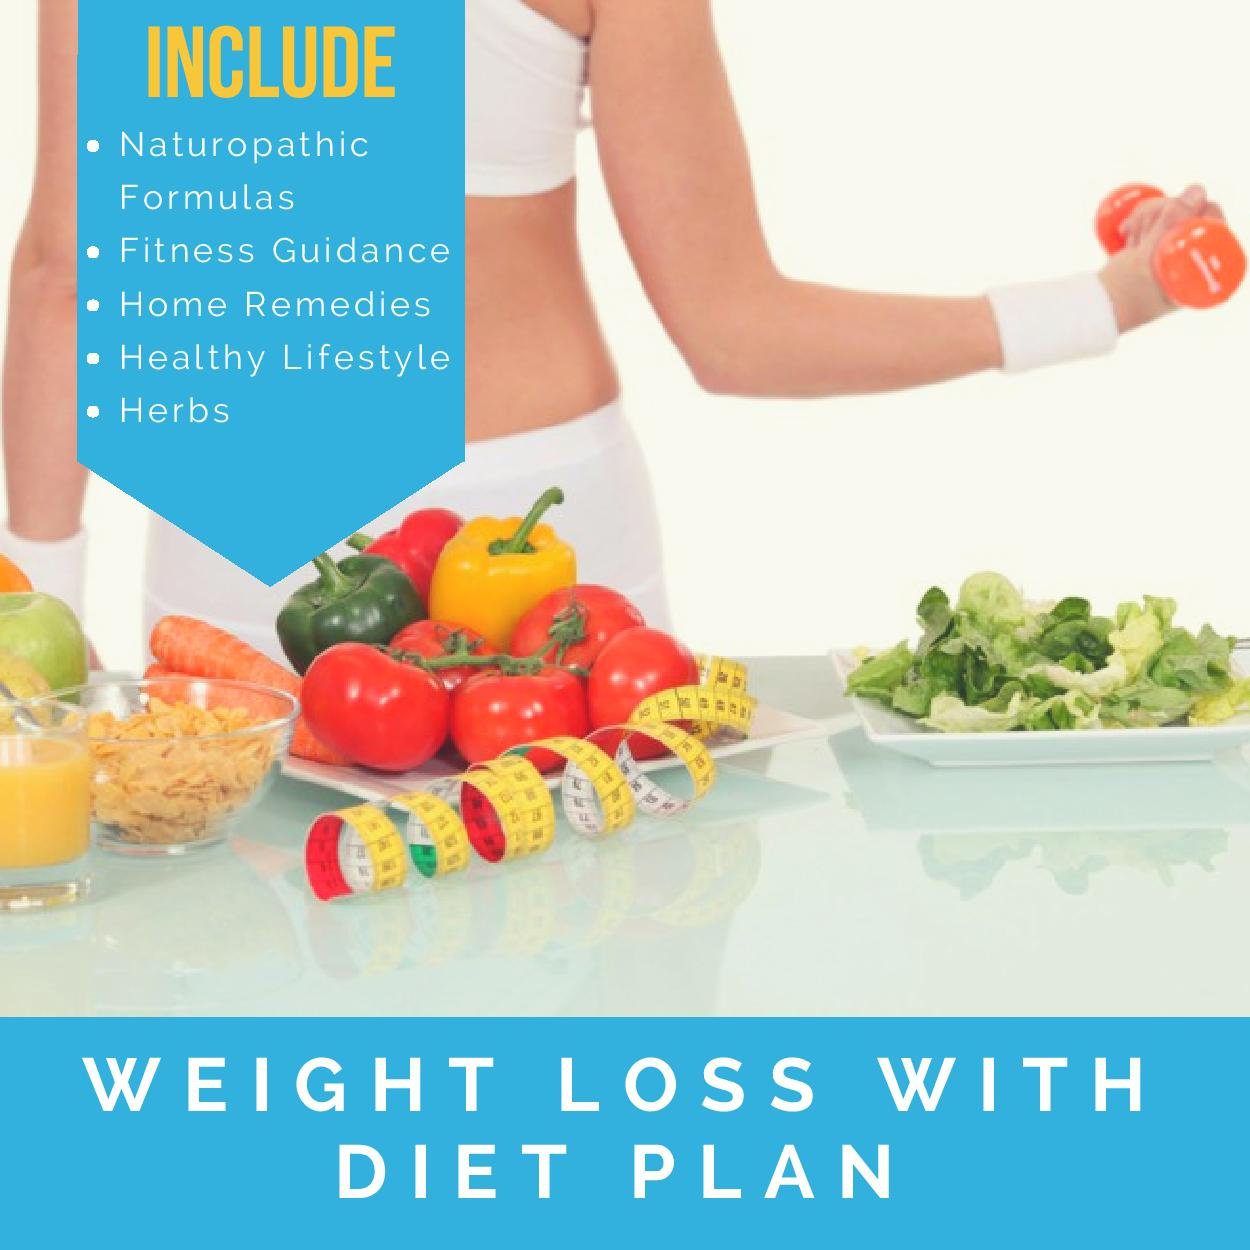 Weight Loss With Diet Plan NUTRIWELL INDIA